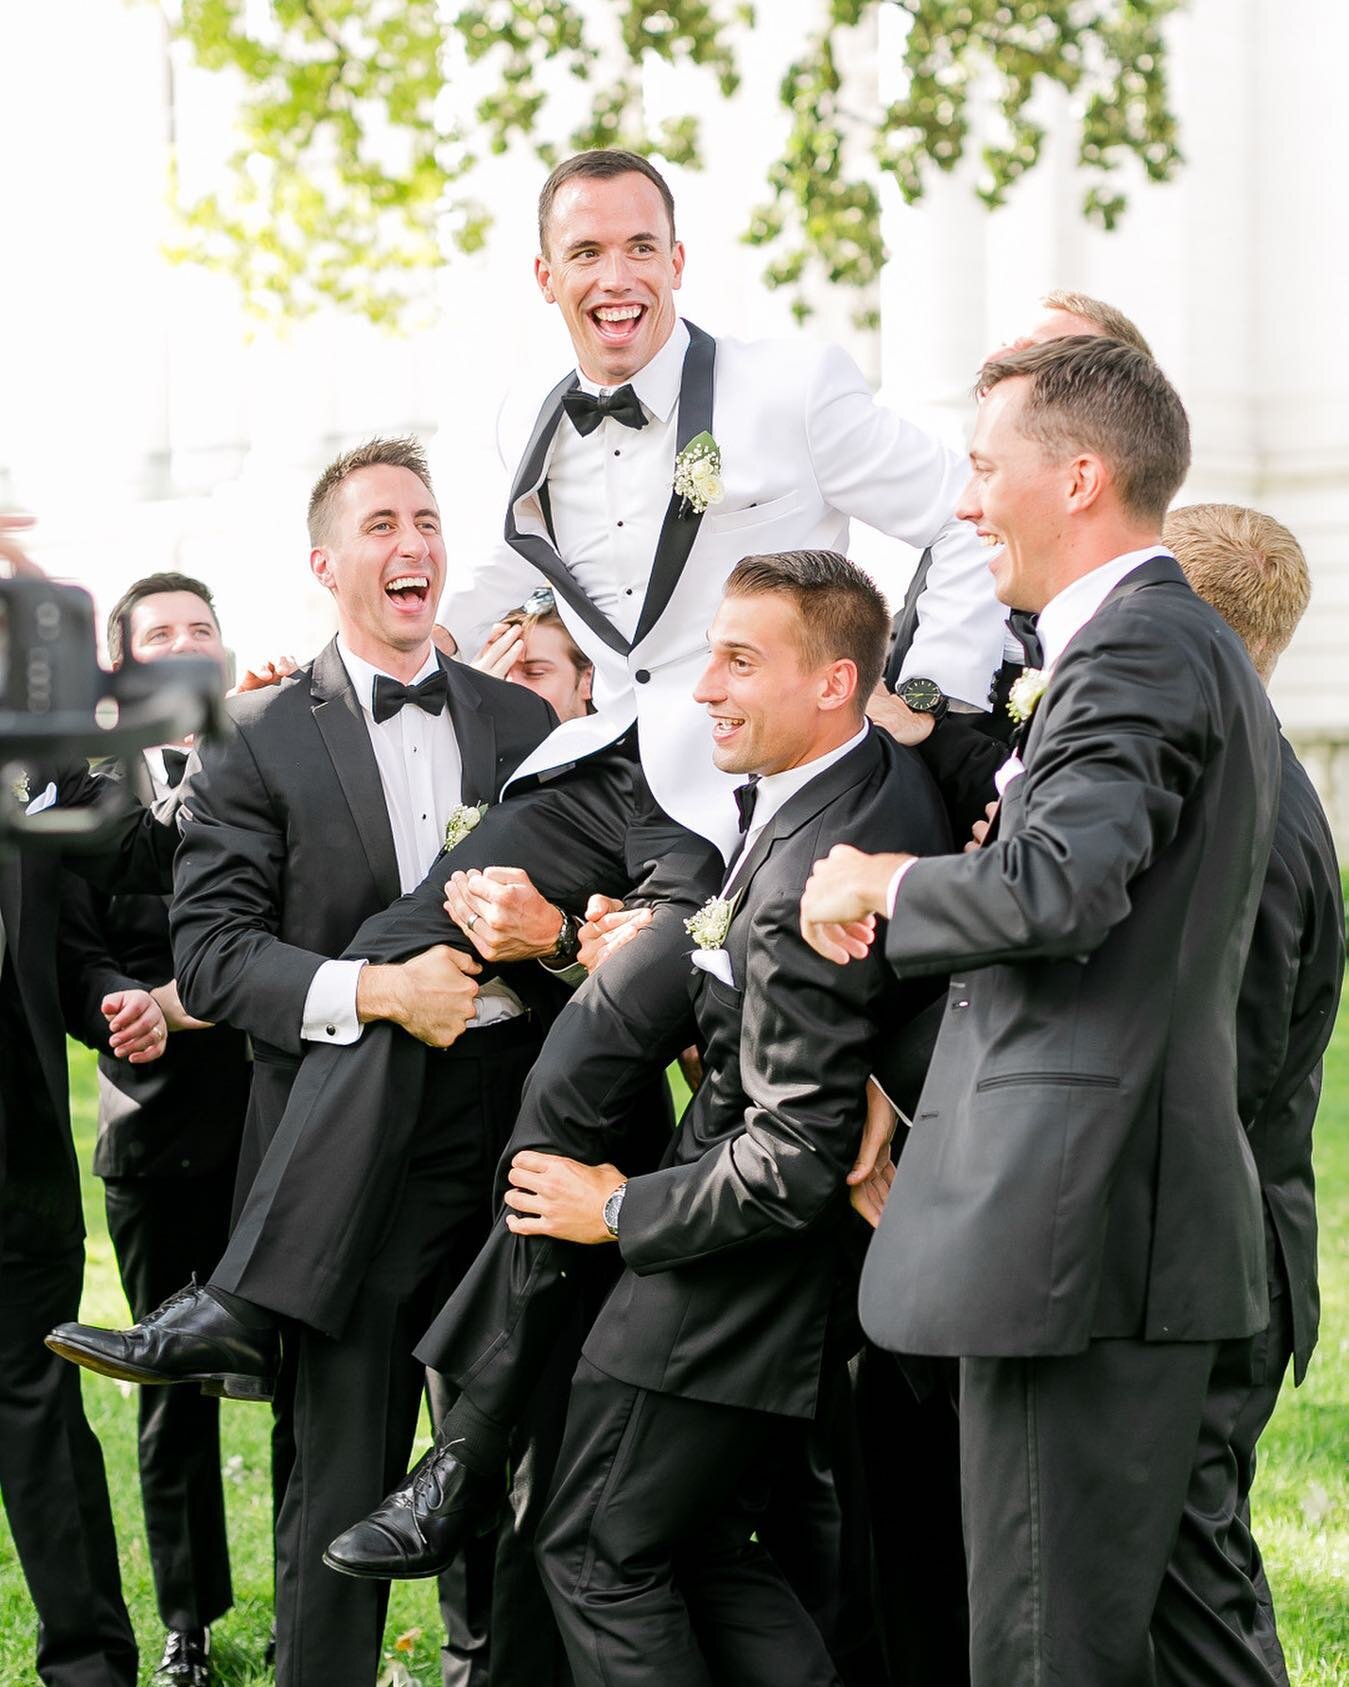 I totally candid moment and definitely one of my all-time favorite grooms/groomsmen images. The moment happened quickly and I LOVE how the tree perfectly frames Dan's head. I feel it makes the image that much more powerful and I love it for that. Plu